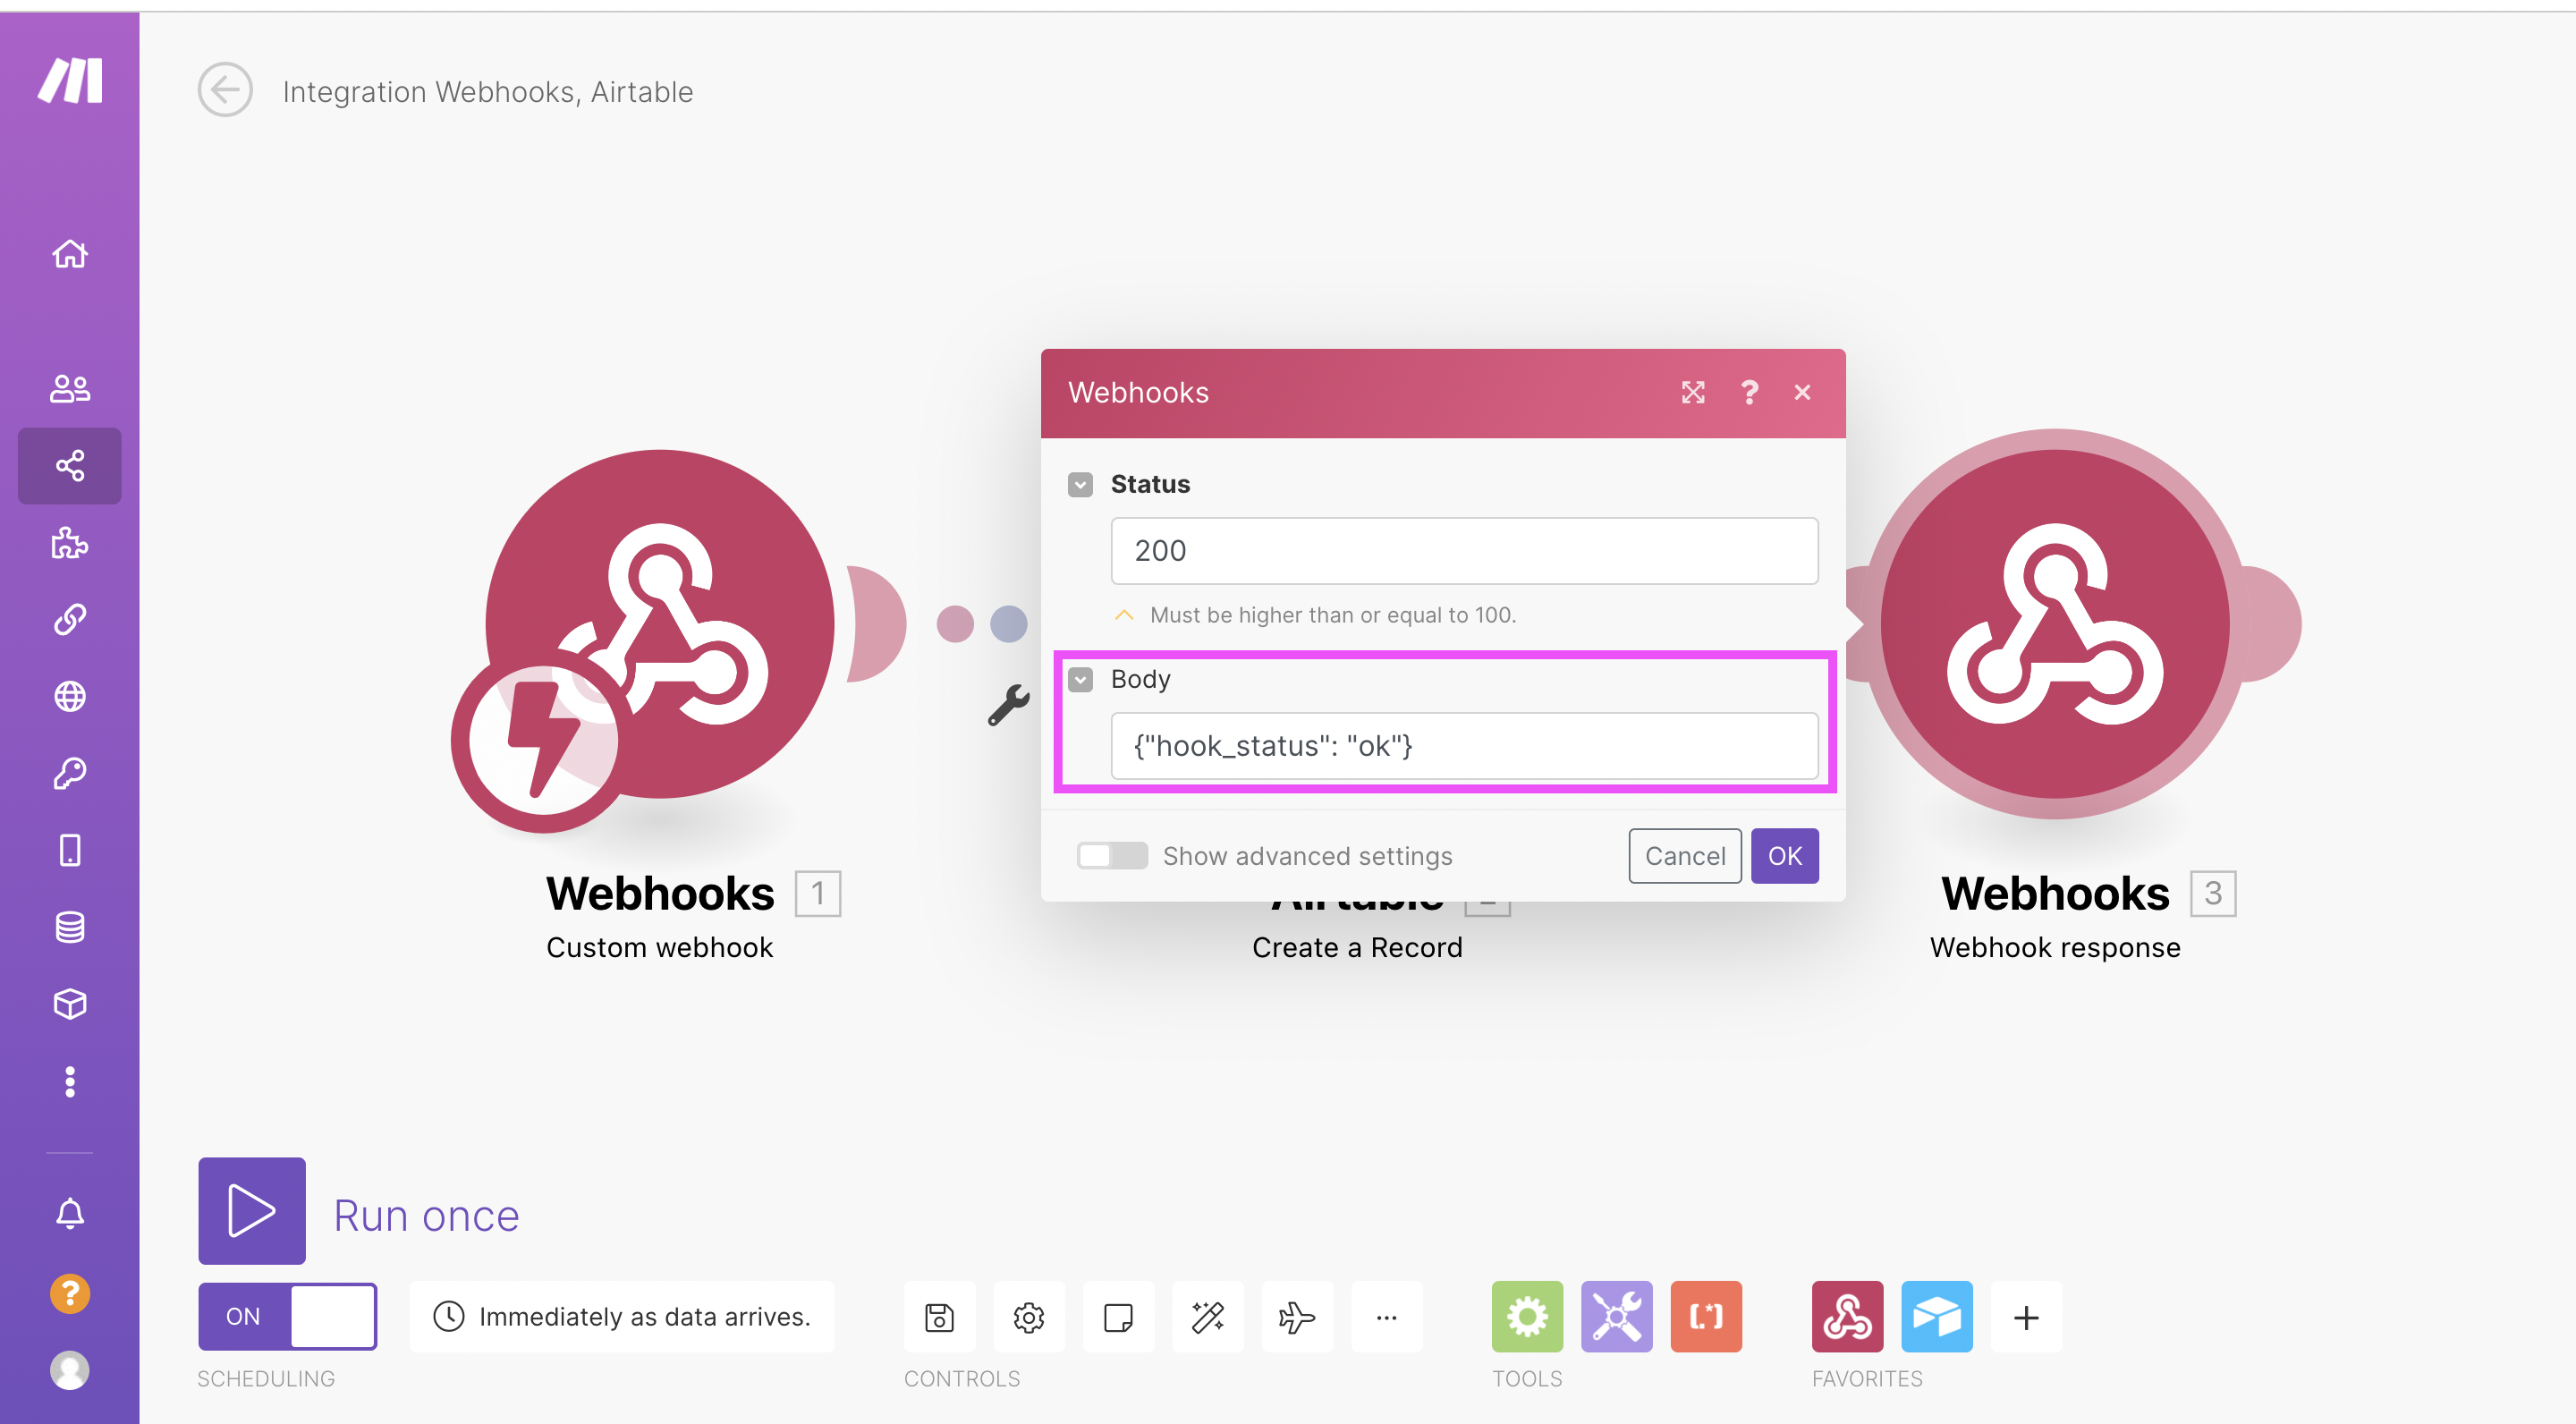 Add a new action into your Integromat / Make scenario: the Webhook response.